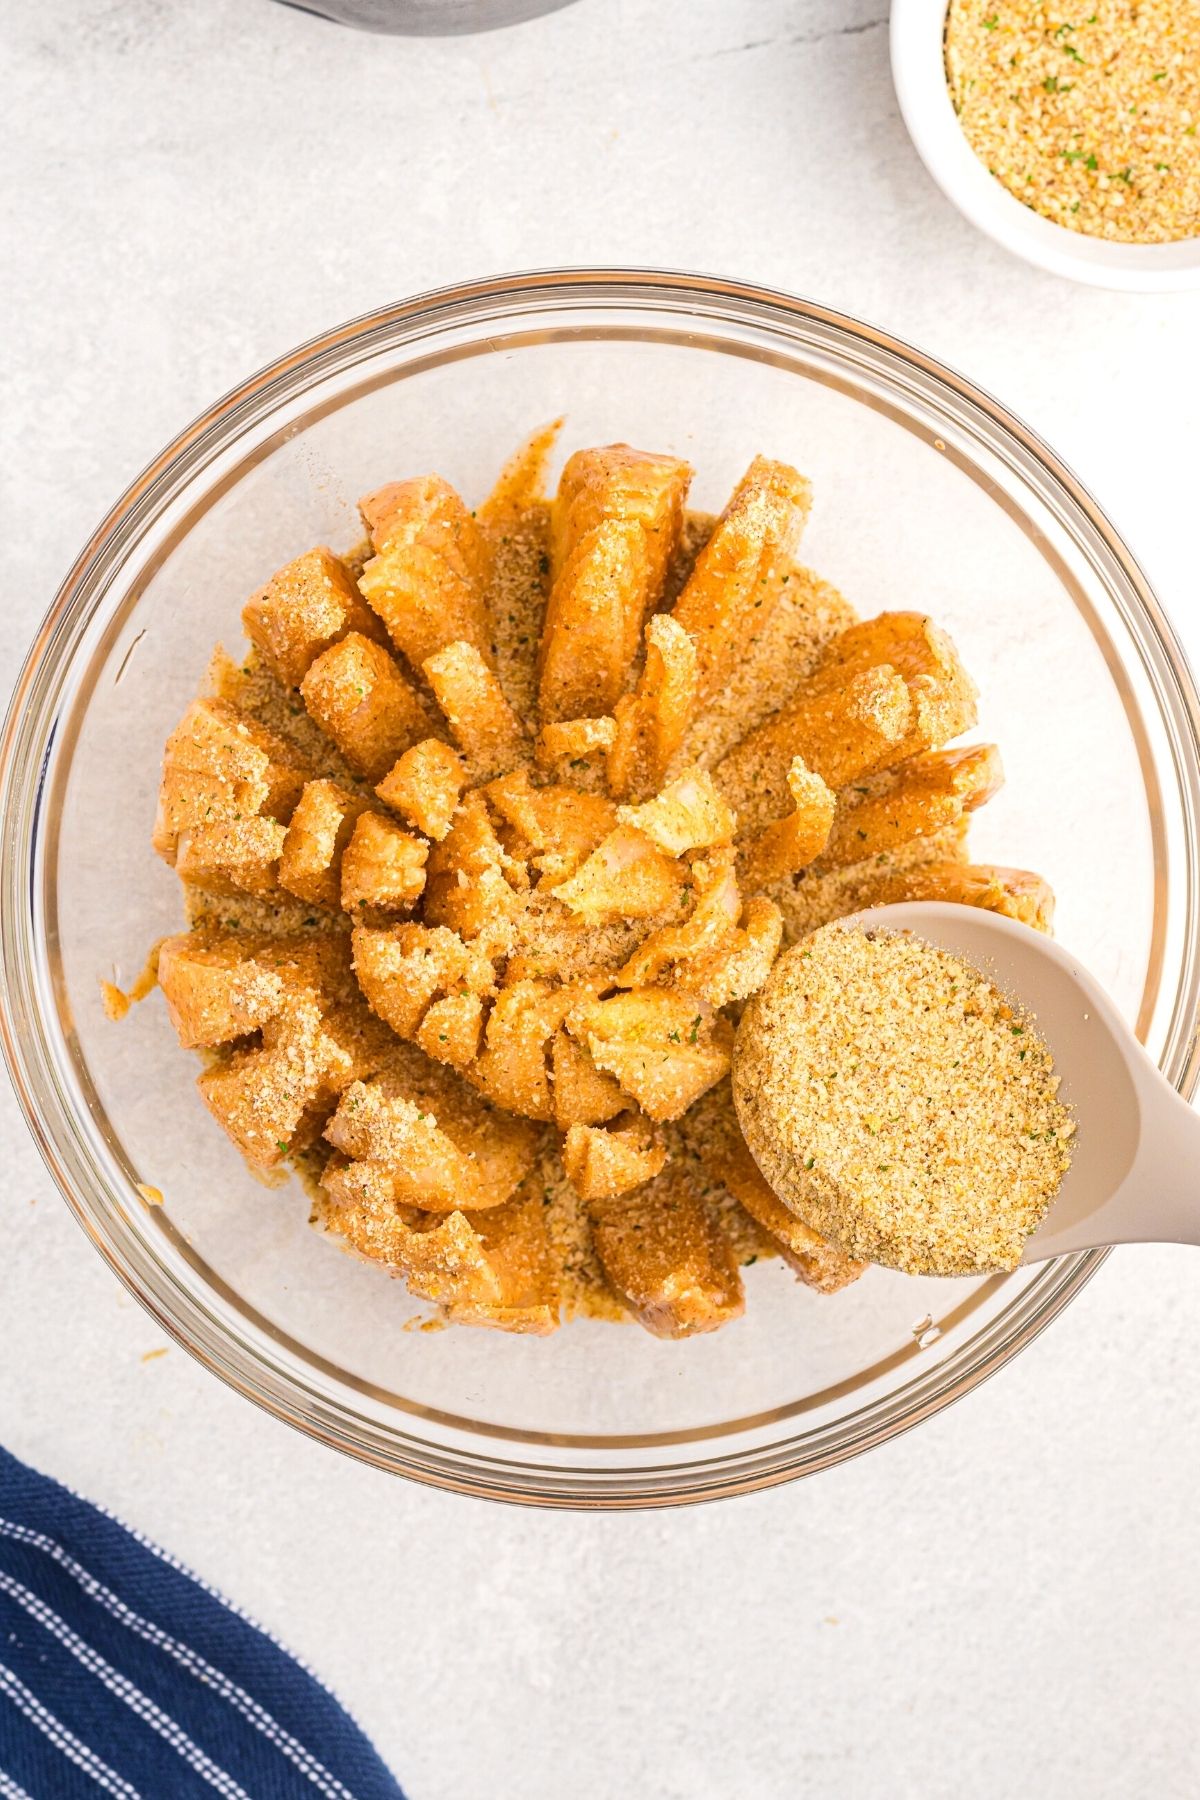 Spoon spreading breadcrumbs over battered onion in a glass bowl